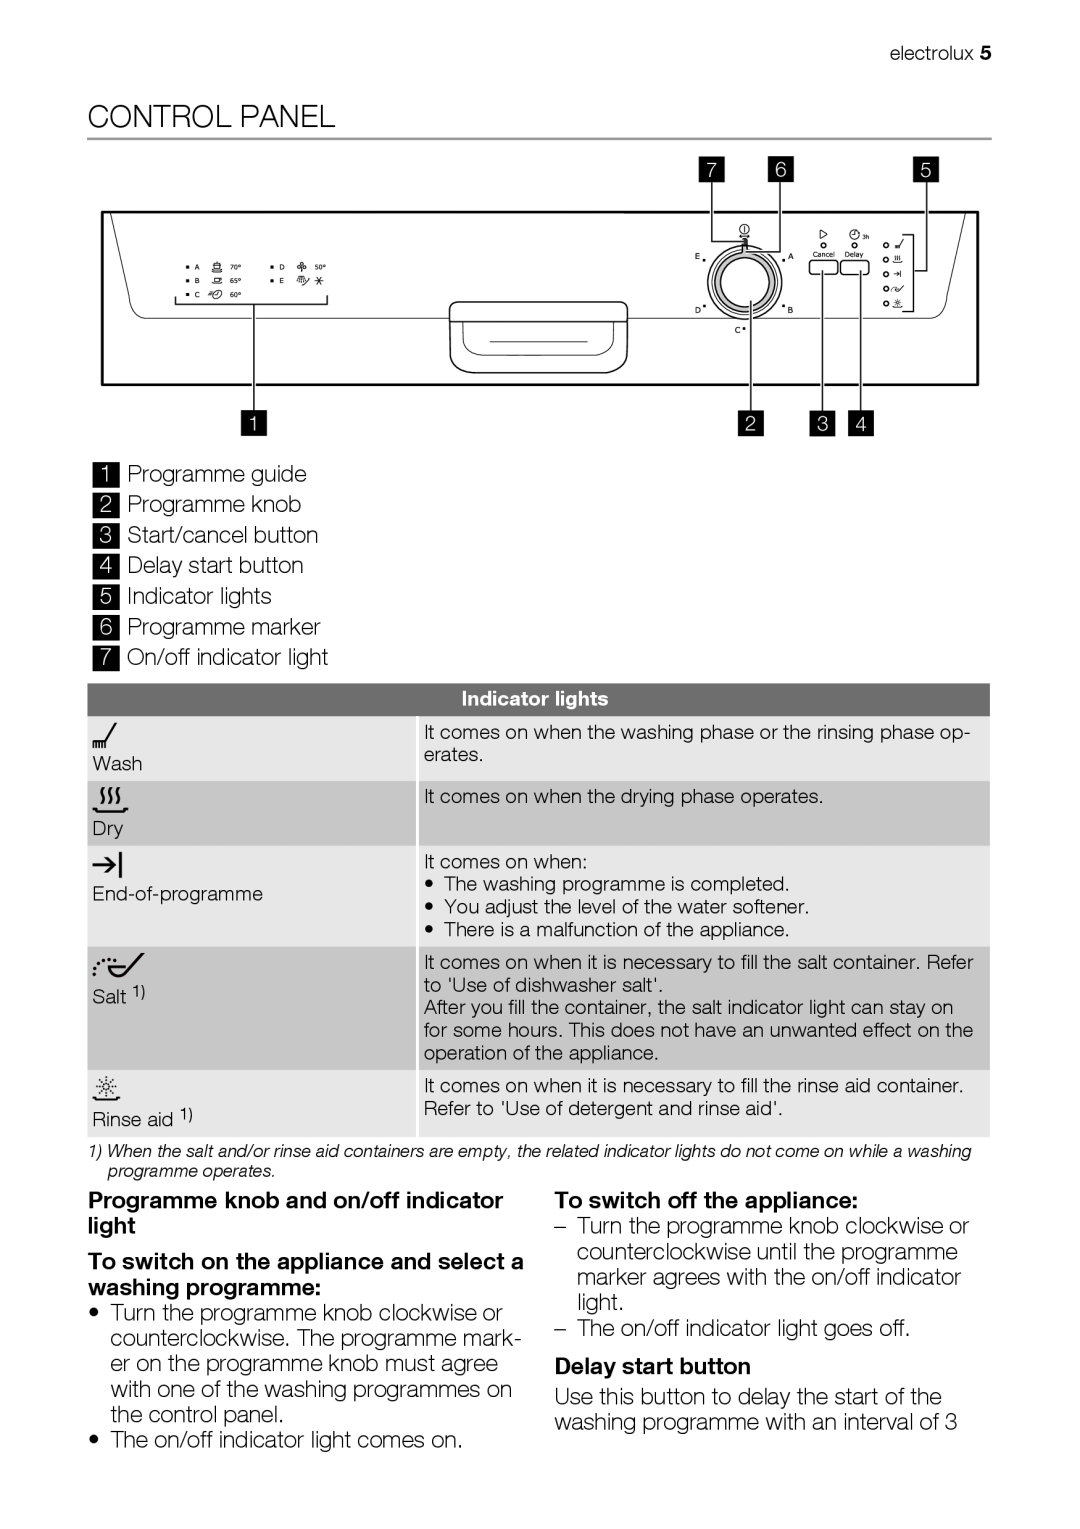 Electrolux ESF63012 user manual Control Panel, Programme knob and on/off indicator light, To switch off the appliance 